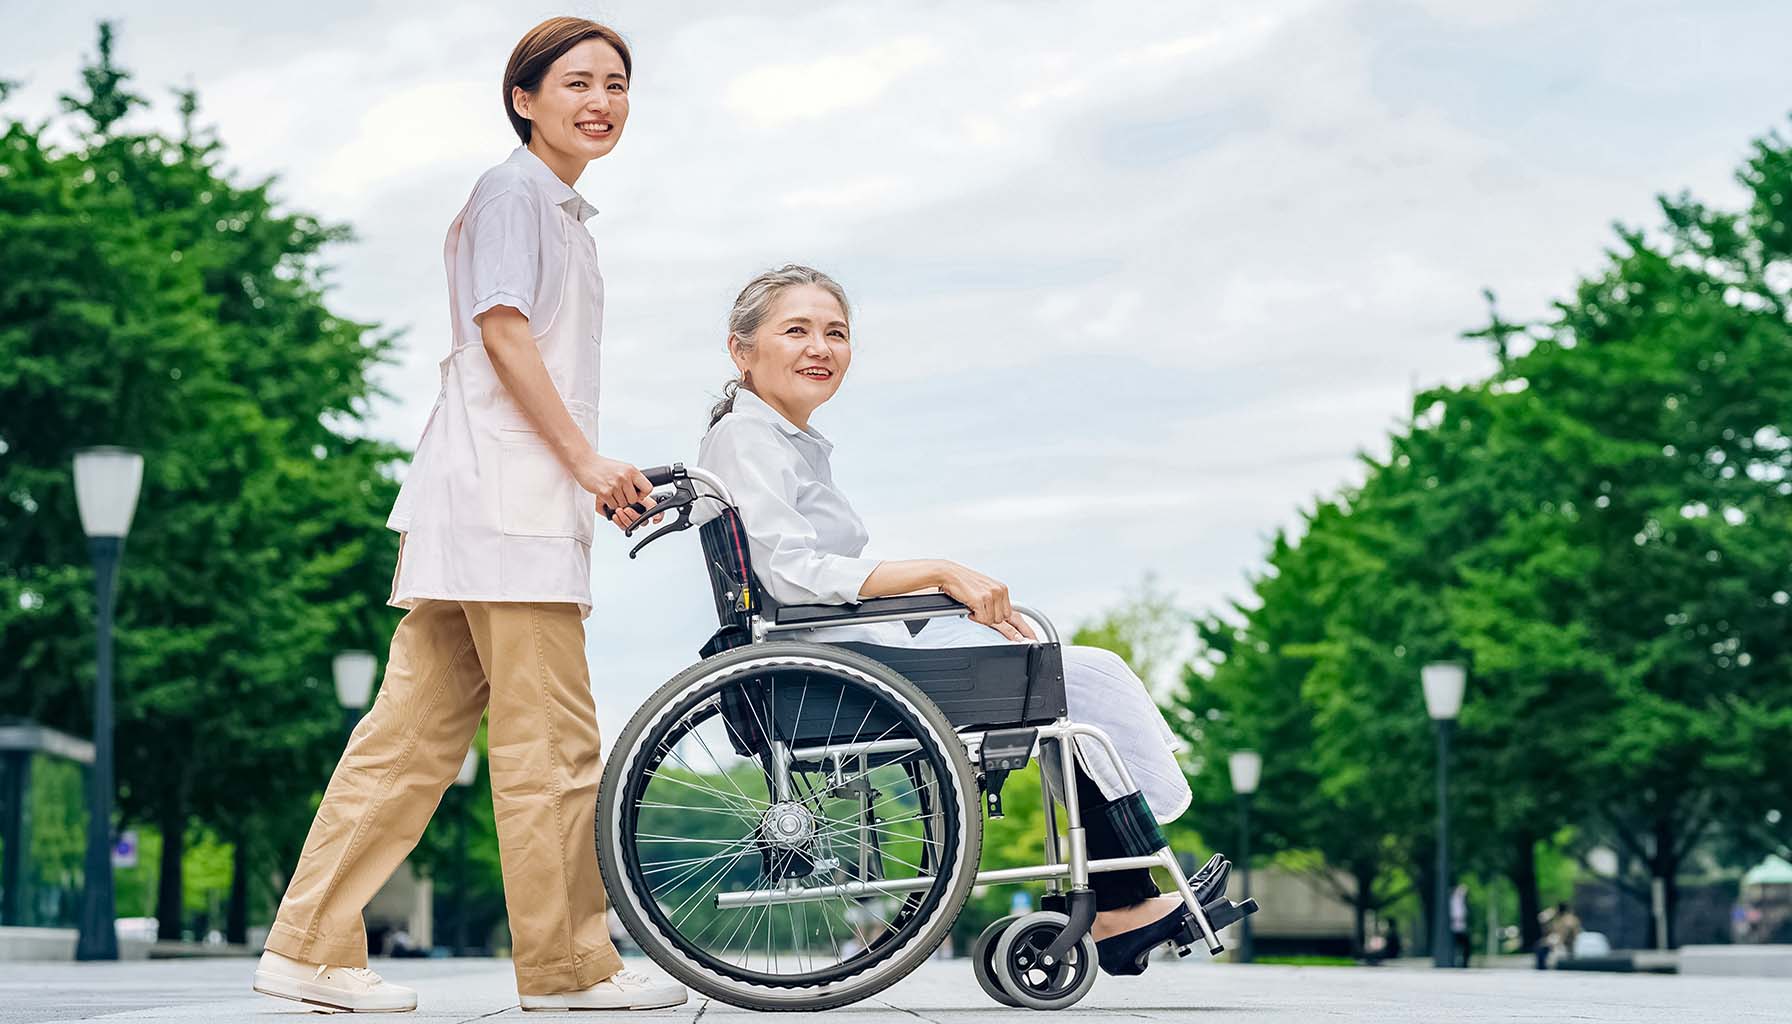 (Nursing home patient in a wheelchair and employee. Photo credit Getty Images, licensed through Unsplash +)